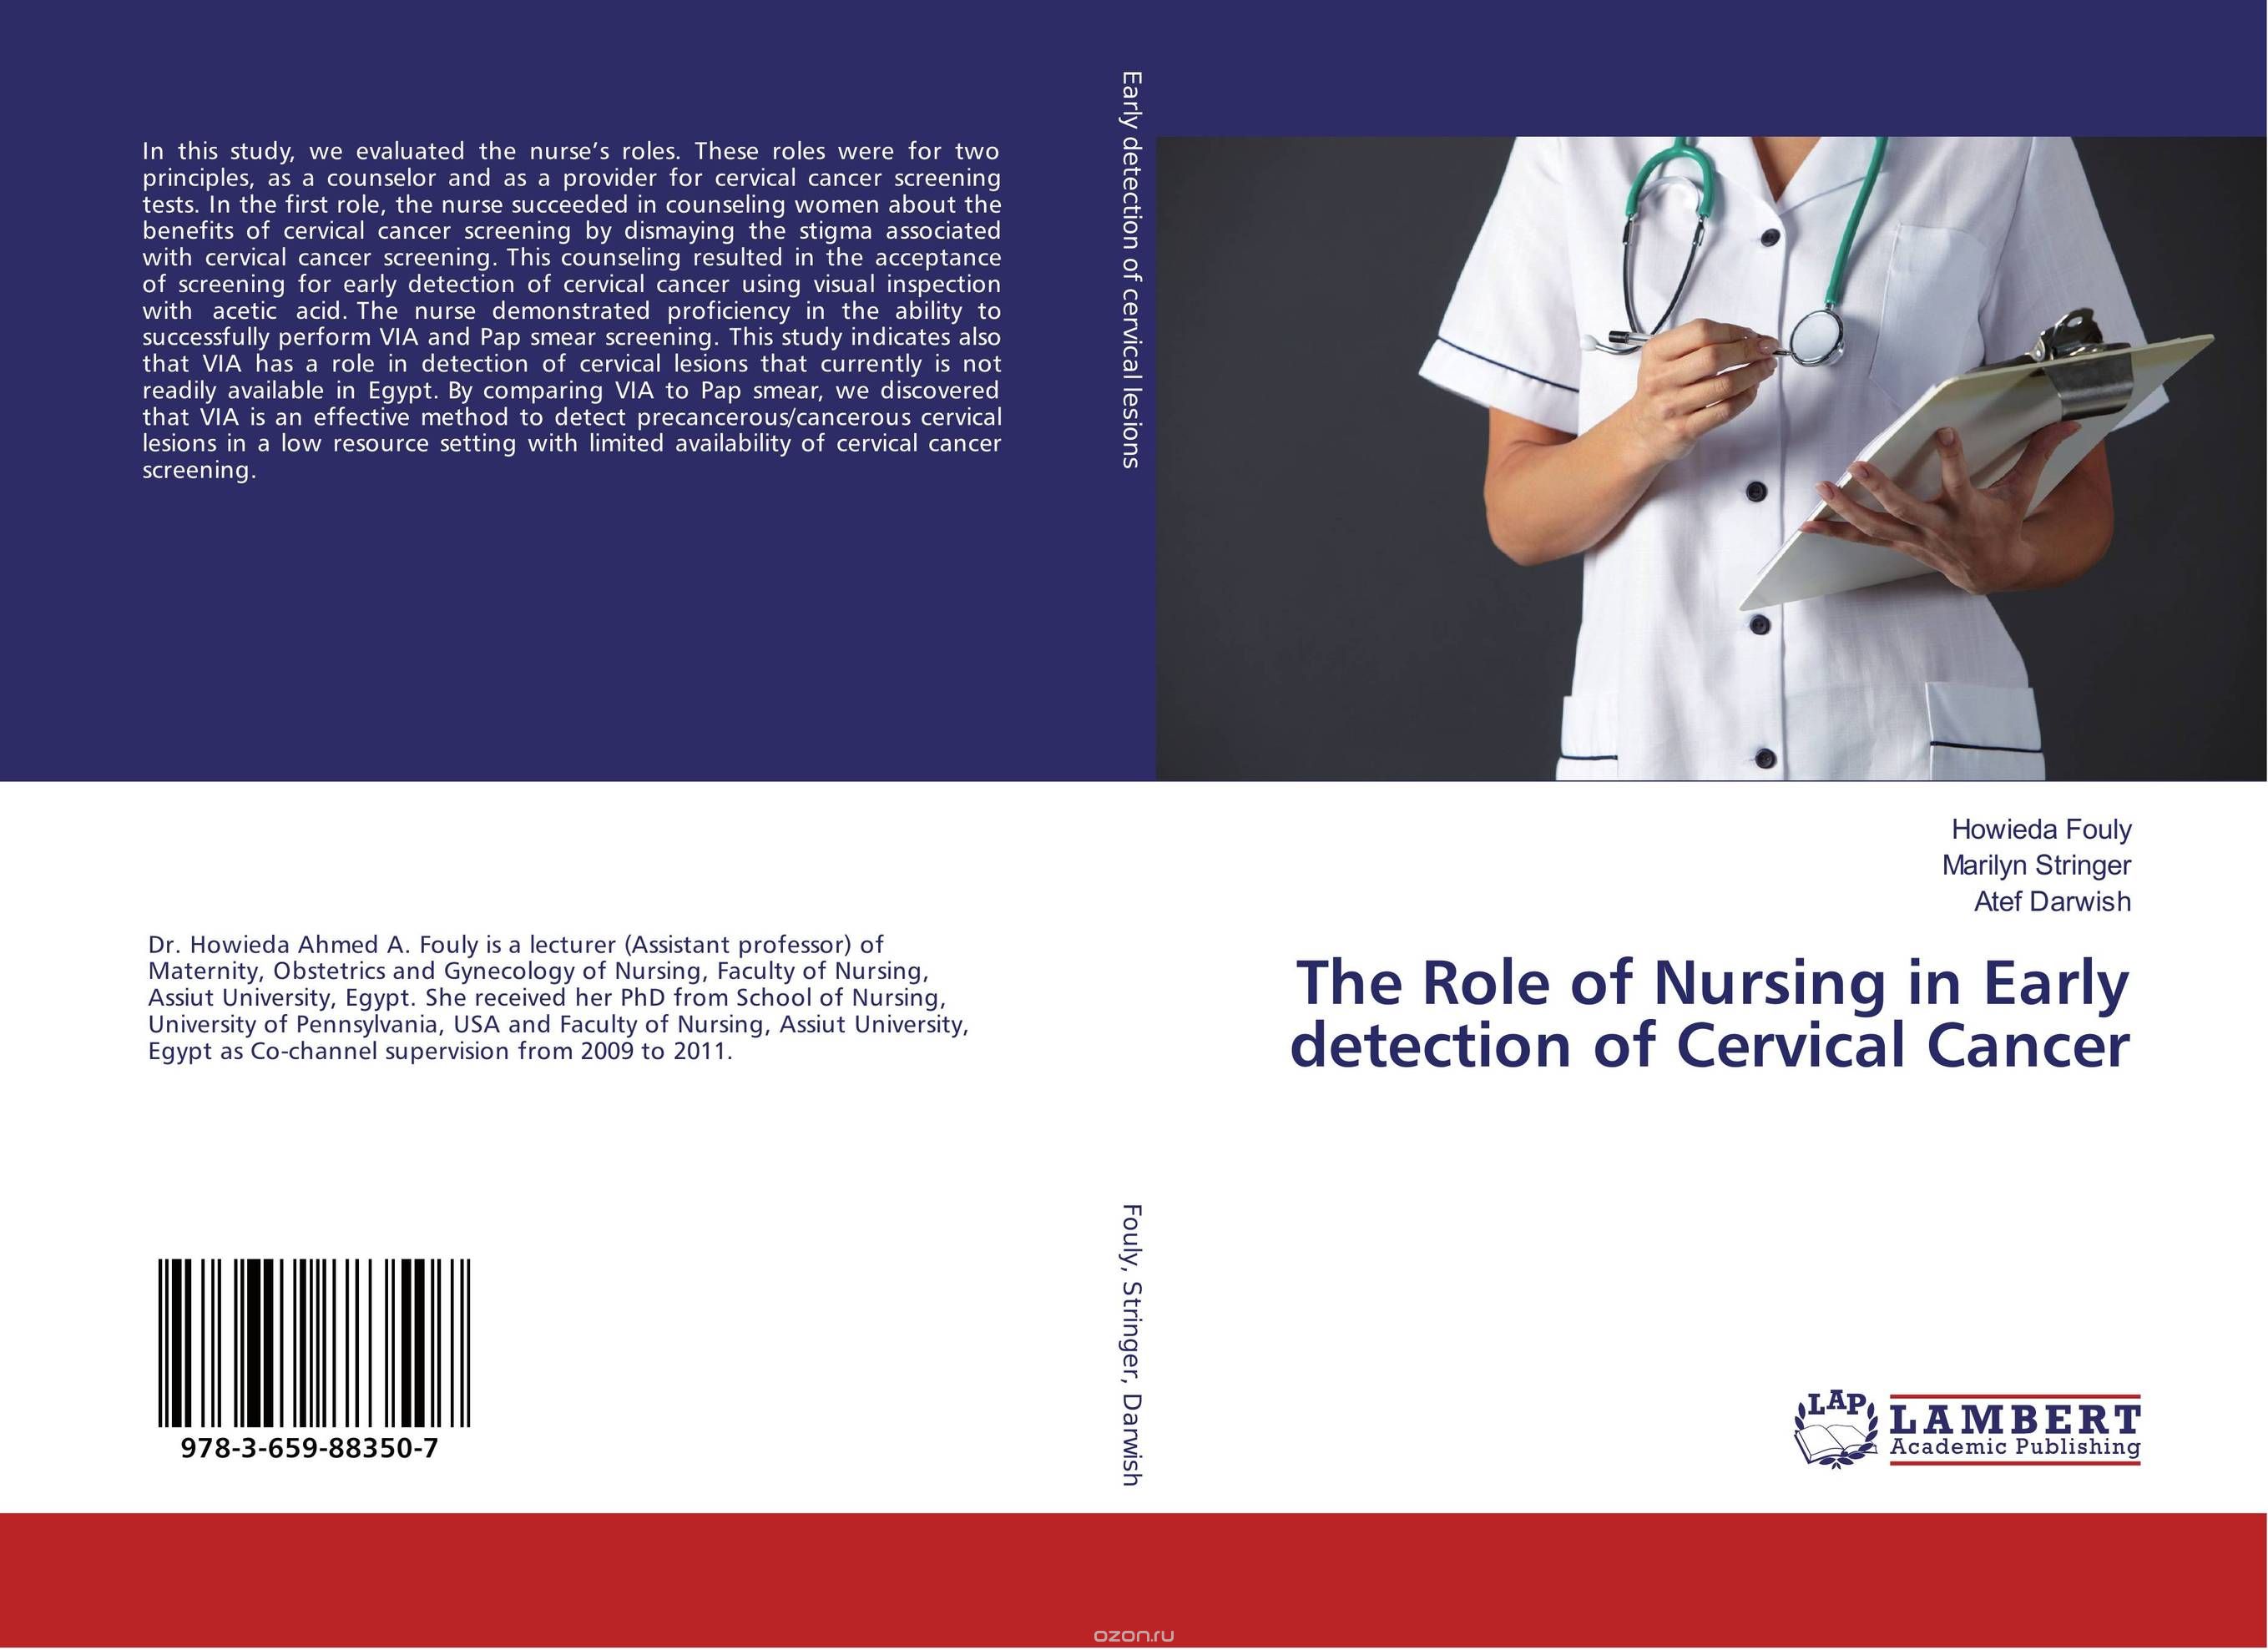 Скачать книгу "The Role of Nursing in Early detection of Cervical Cancer"